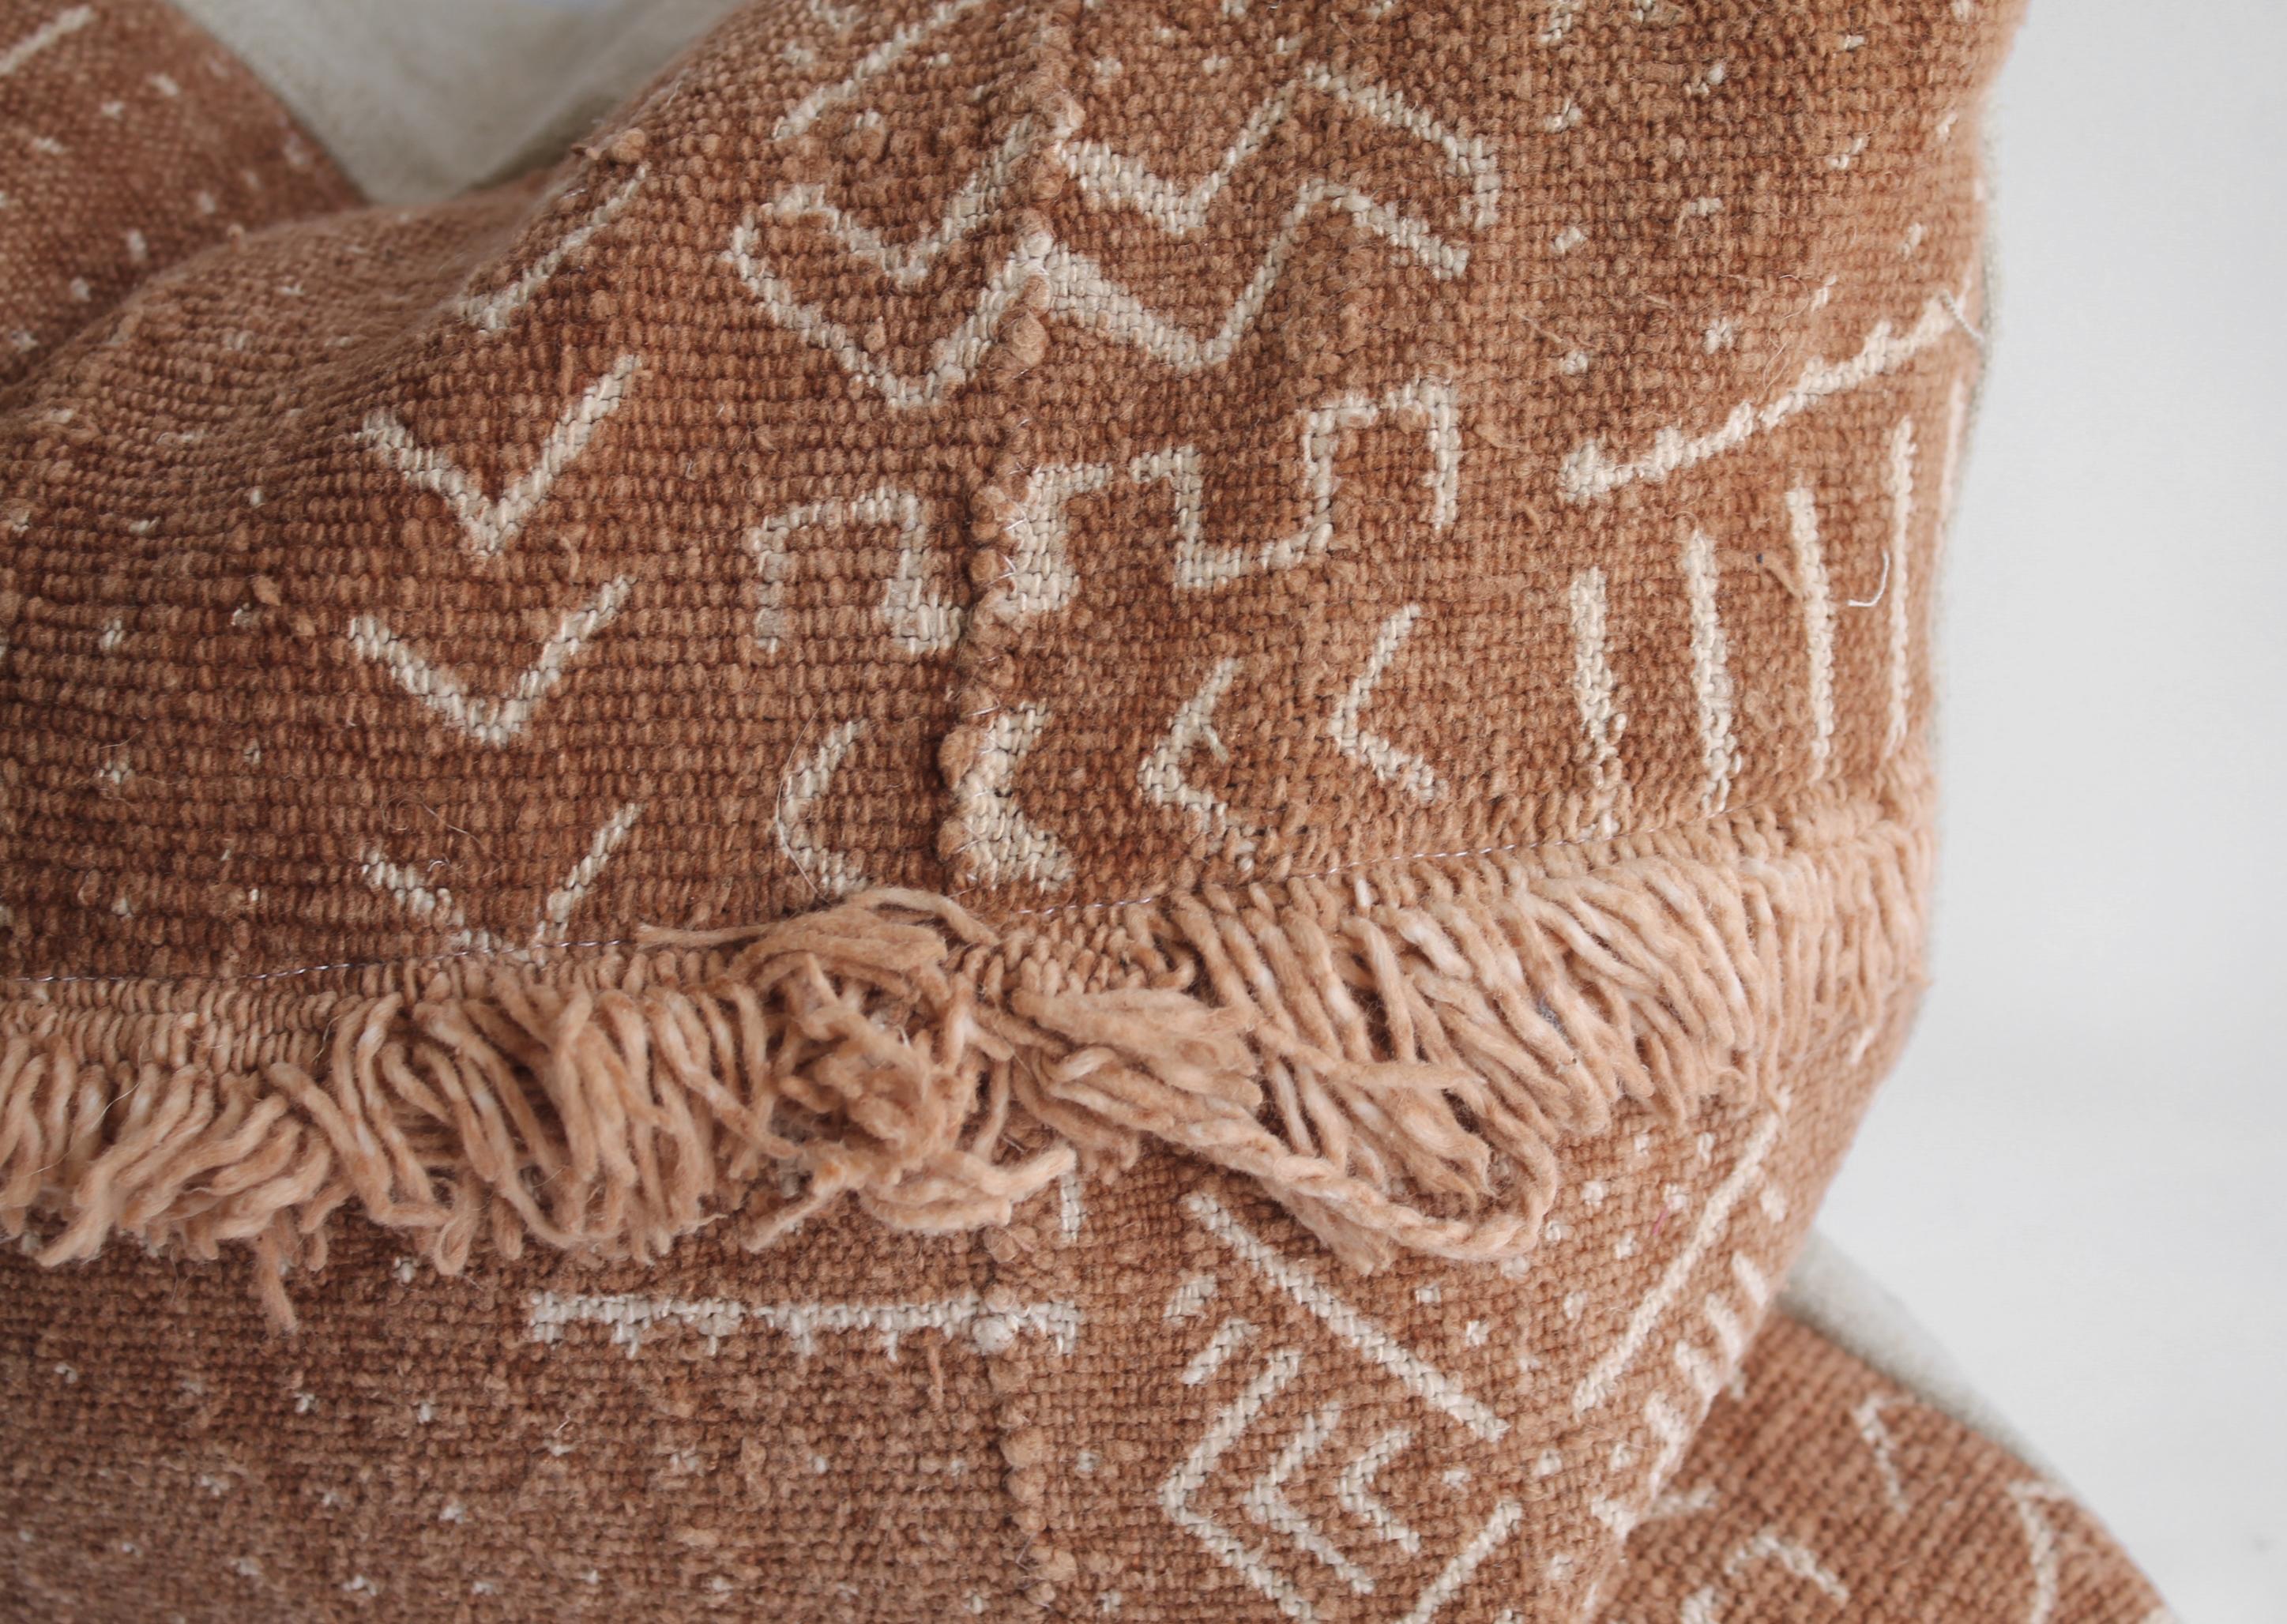 Vintage African Mudcloth pillows with original fringe details a deep burnt orange rust color, with off white arrow pattern, and features original fringe details from the original material. Sewn with a zipper closure, and natural linen backing. The